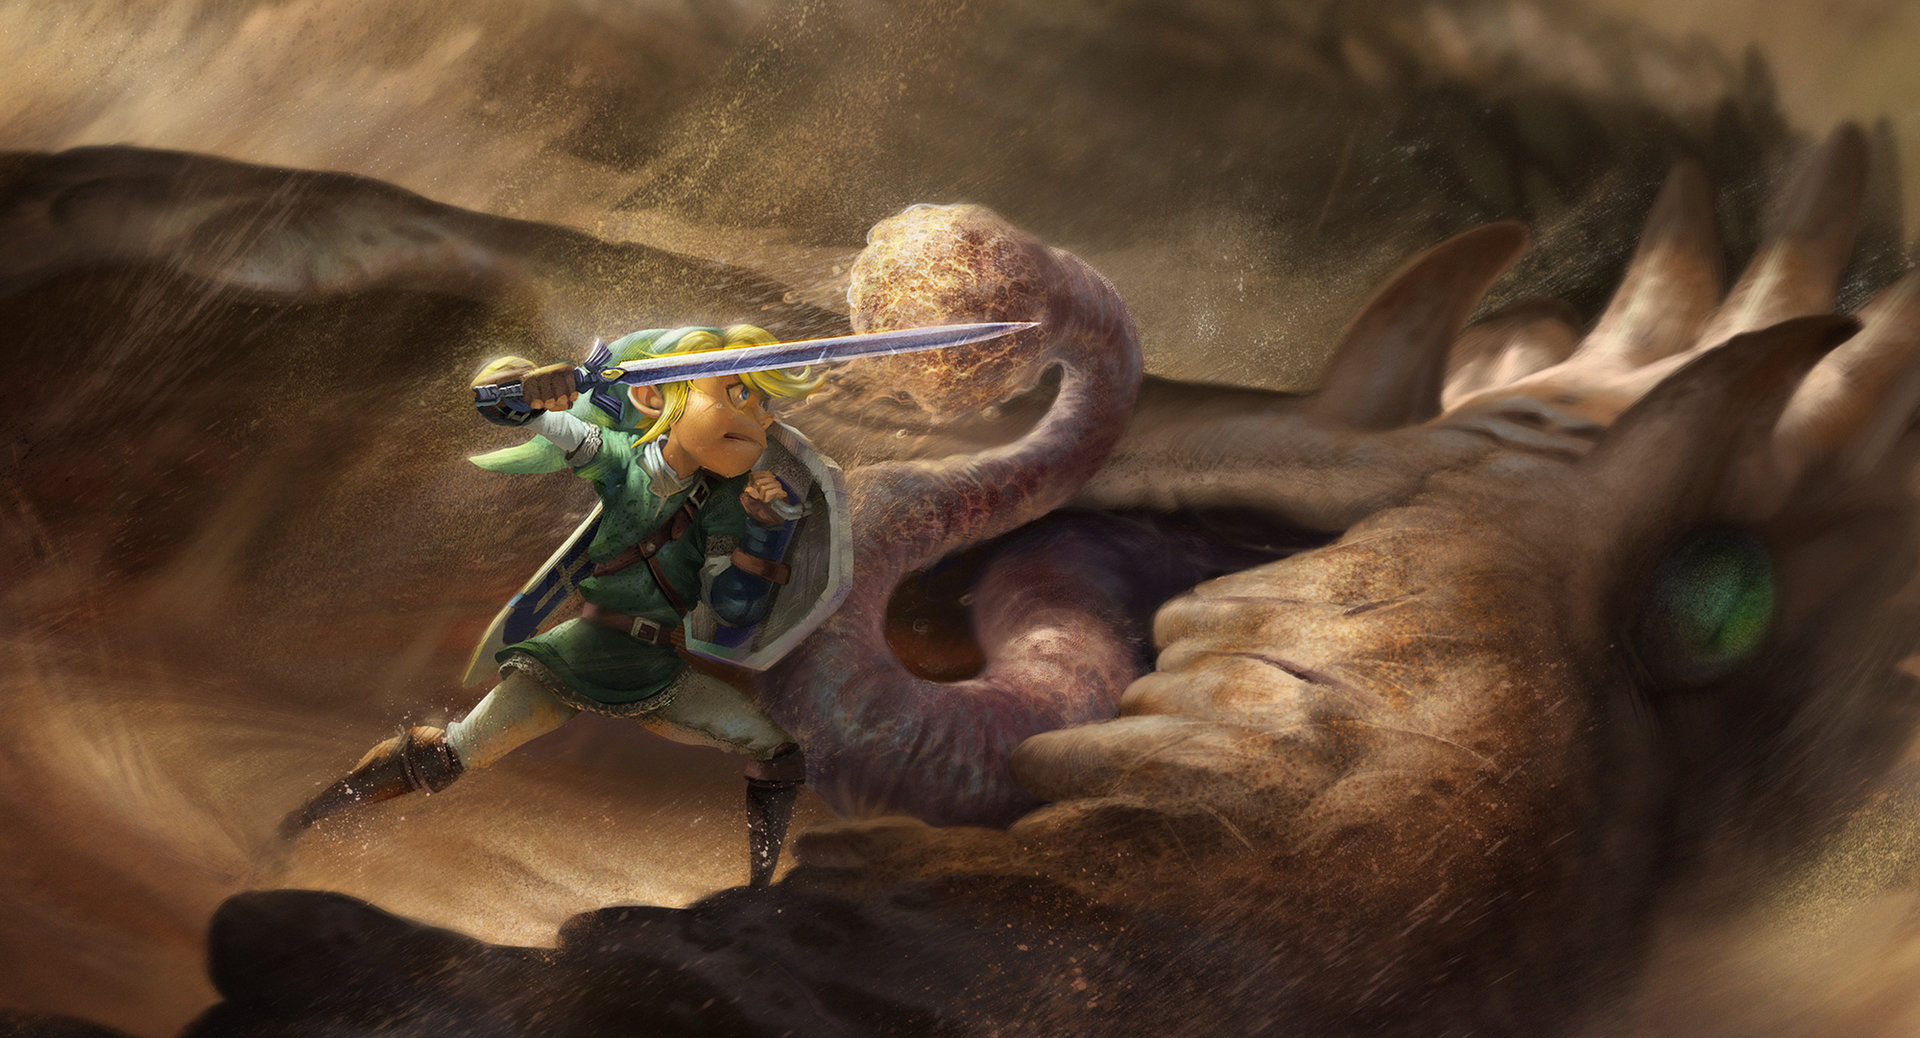 Fine Art: Stab It, Link, Right In Its Stupid Face